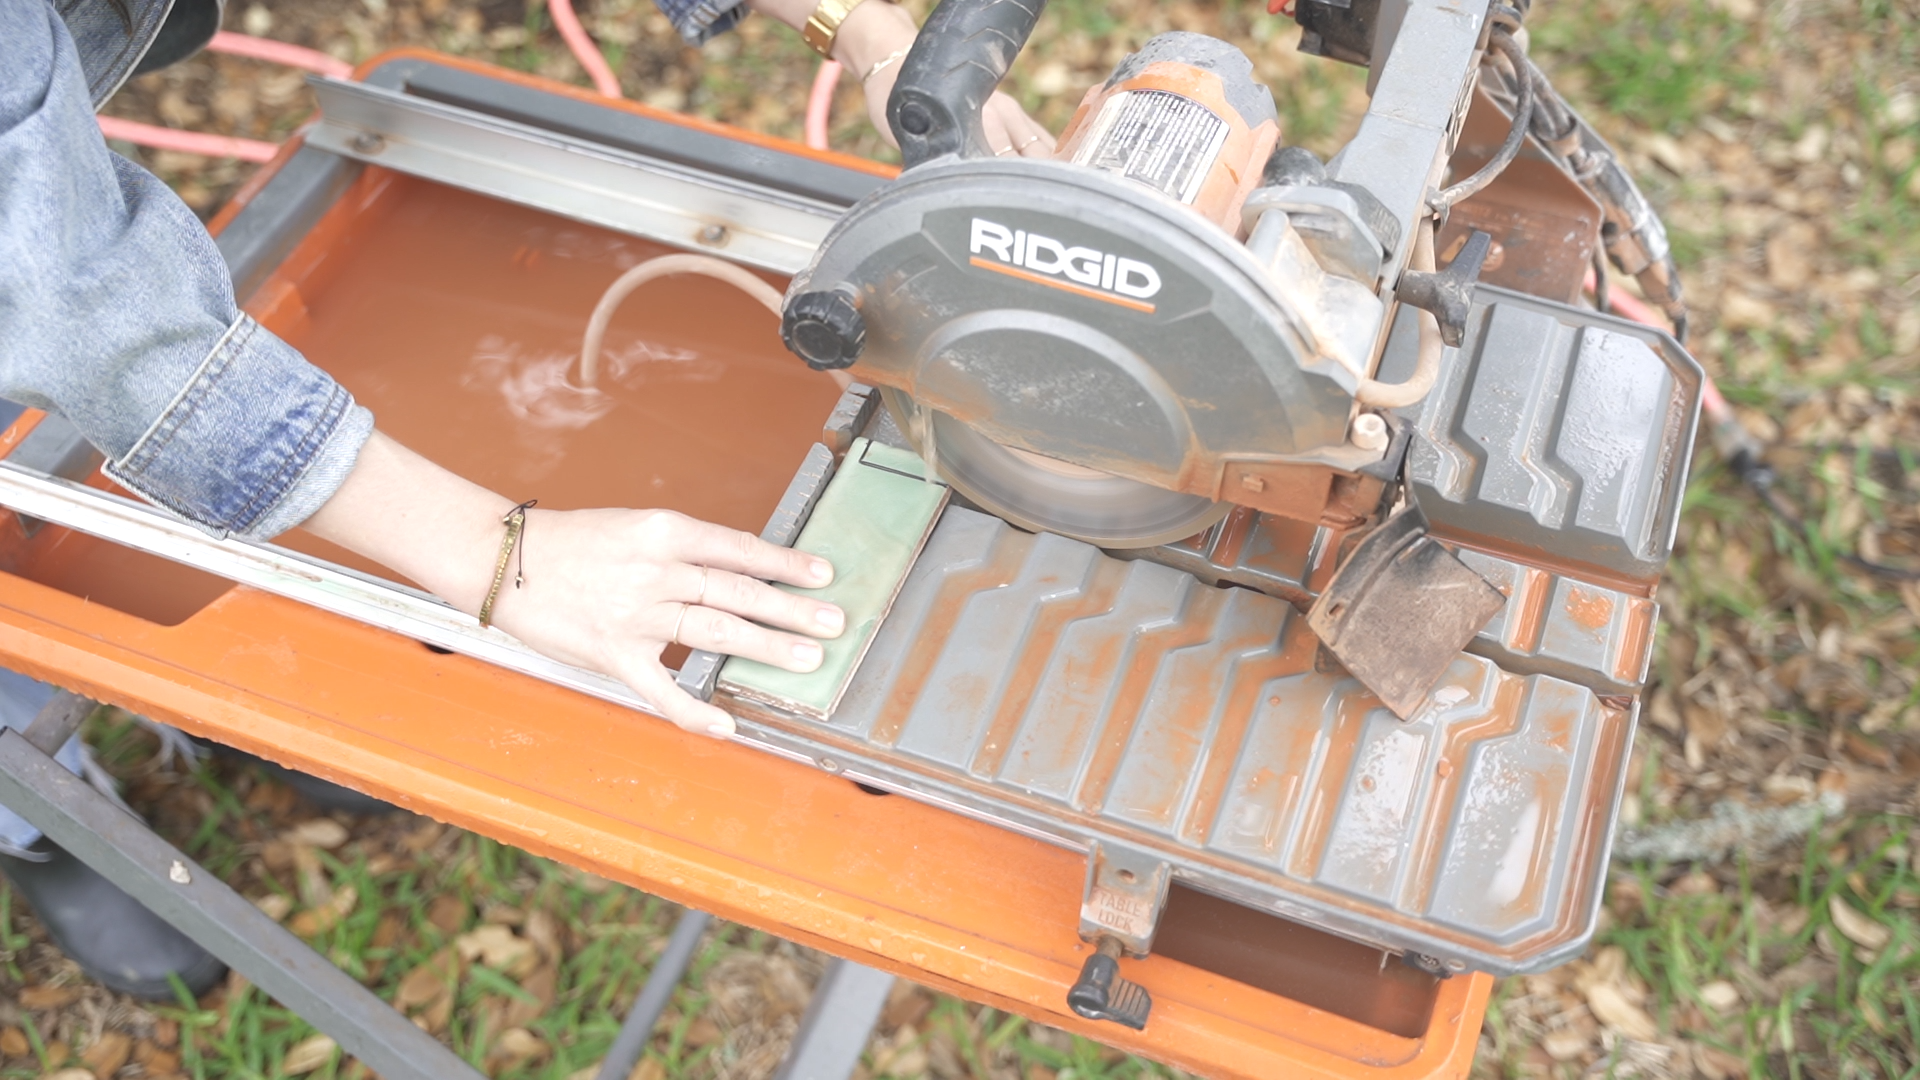 How to cut tiles using a wet saw